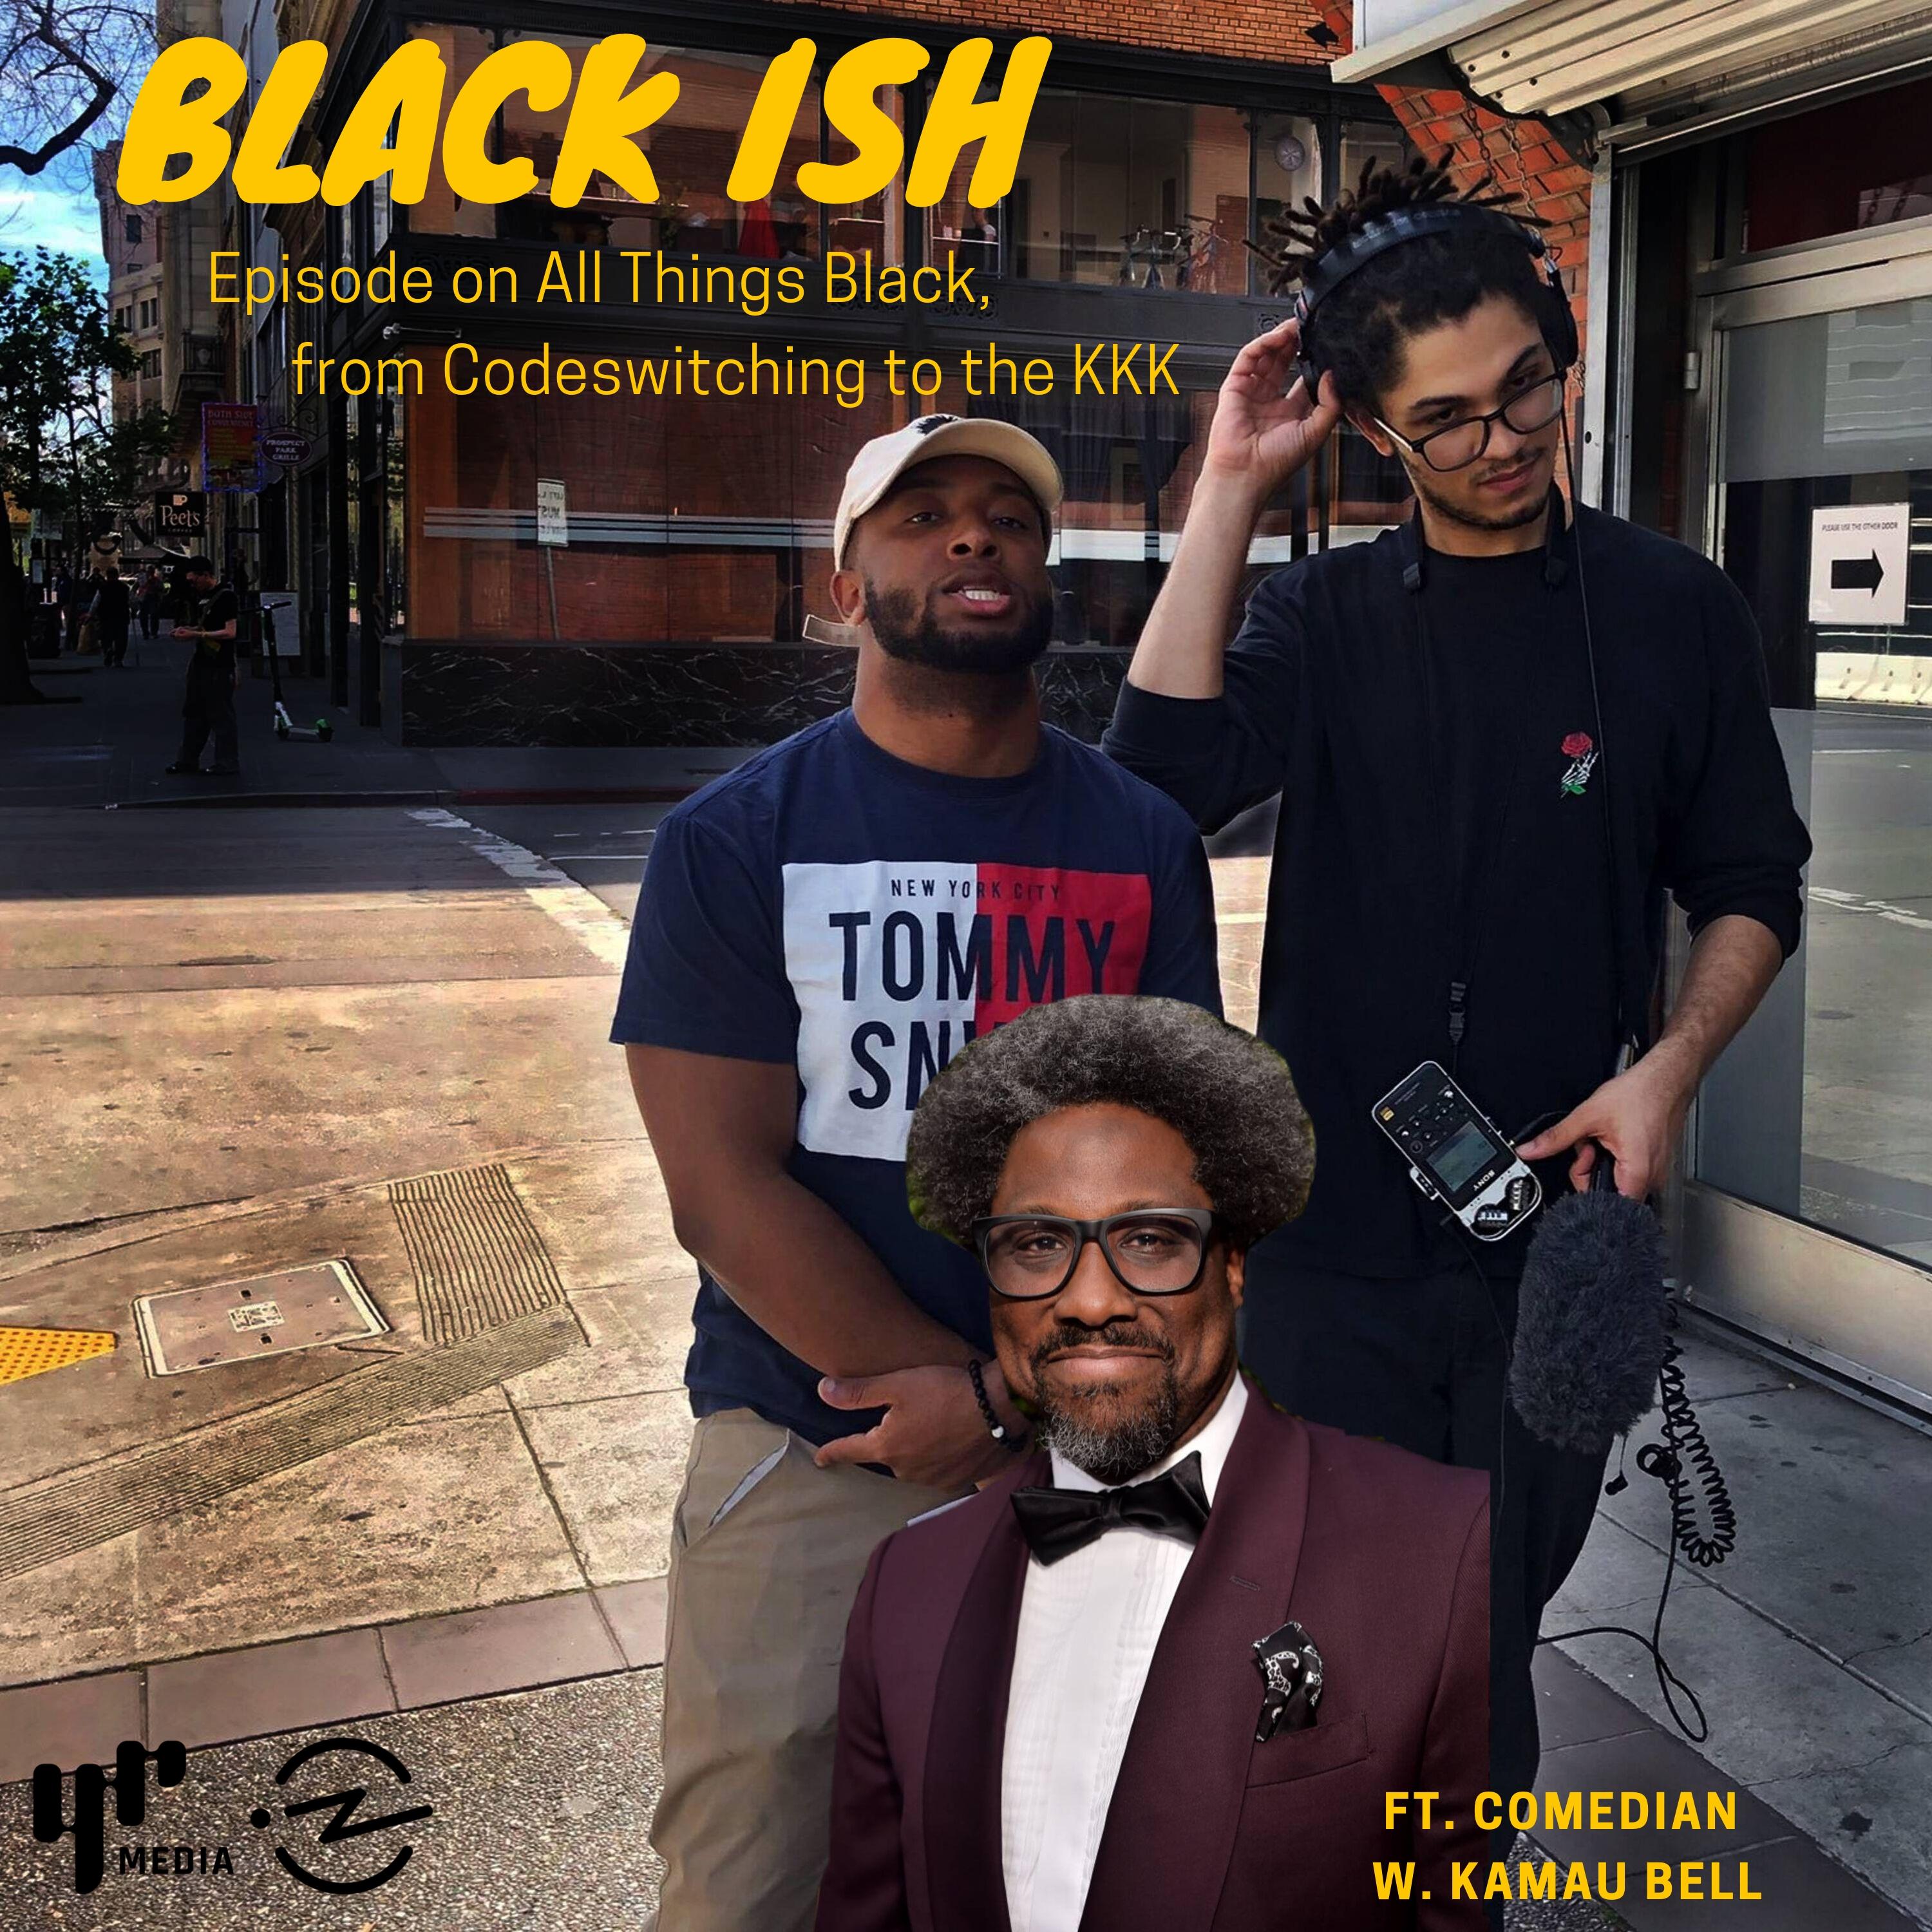 Thumbnail for "Black ISH (ft. Comedian W. Kamau Bell & Code-switching)".